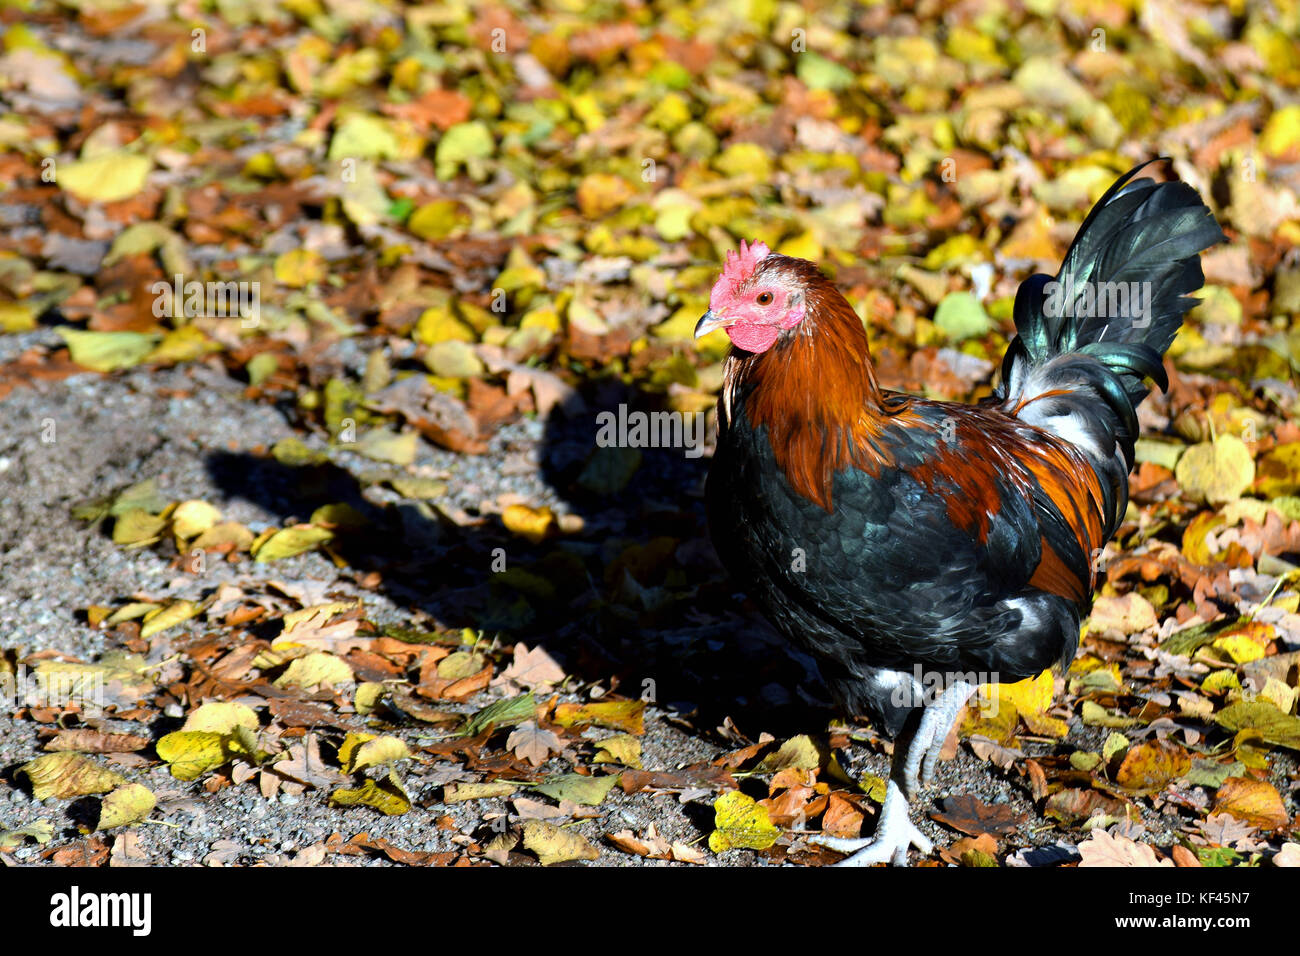 Cock or rooster, domestic chicken (Gallus gallus domesticus) walking. Colorful autumn leaves on the ground. Stock Photo